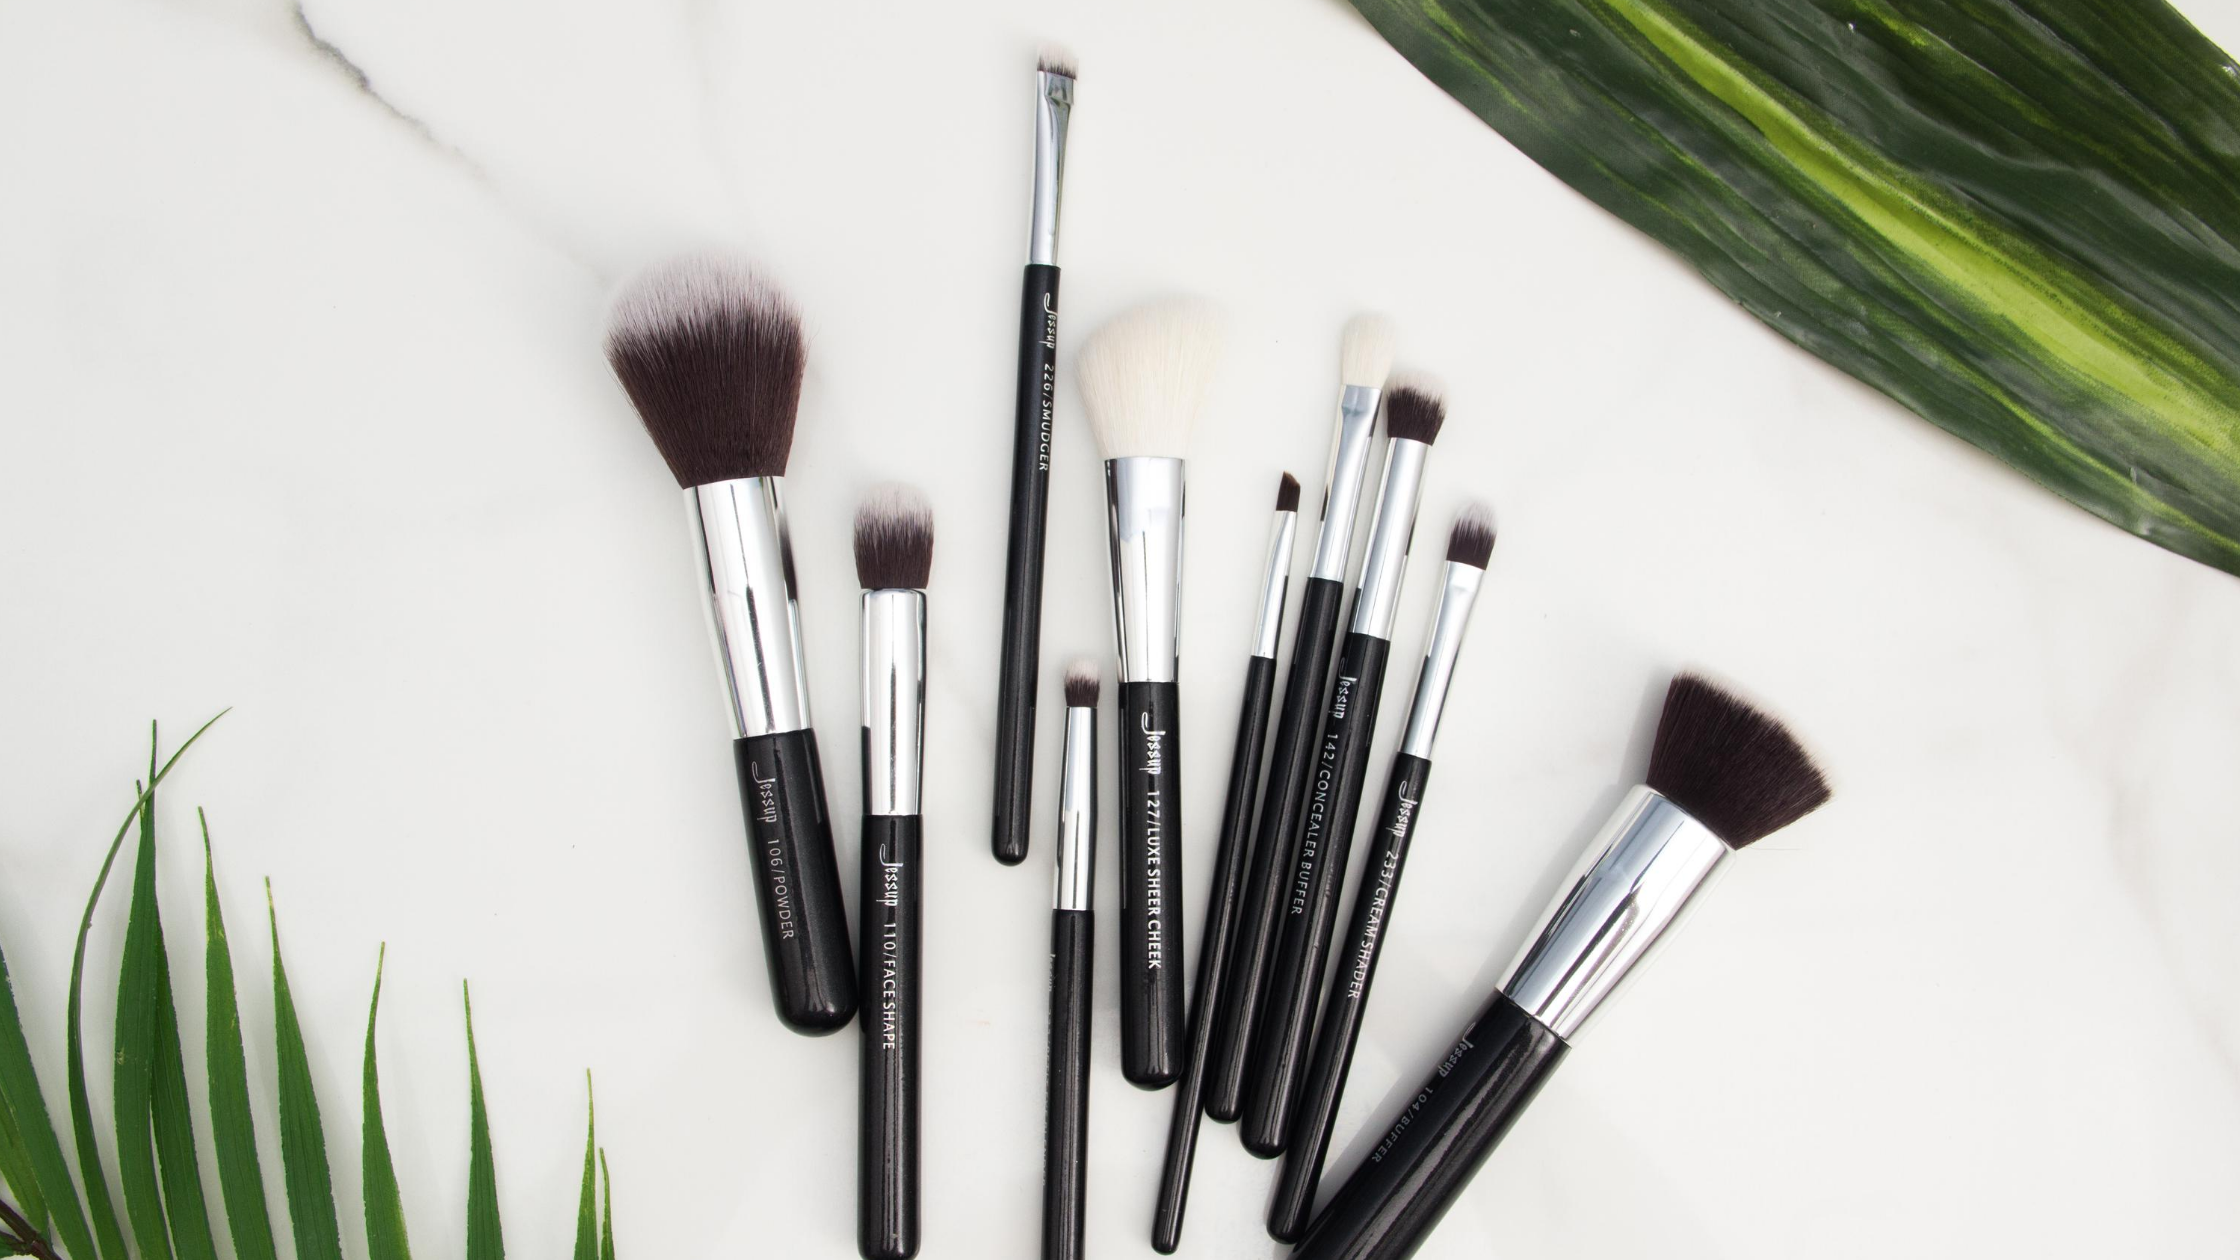 A Beginners' Guide To Buying Basic Makeup Brushes